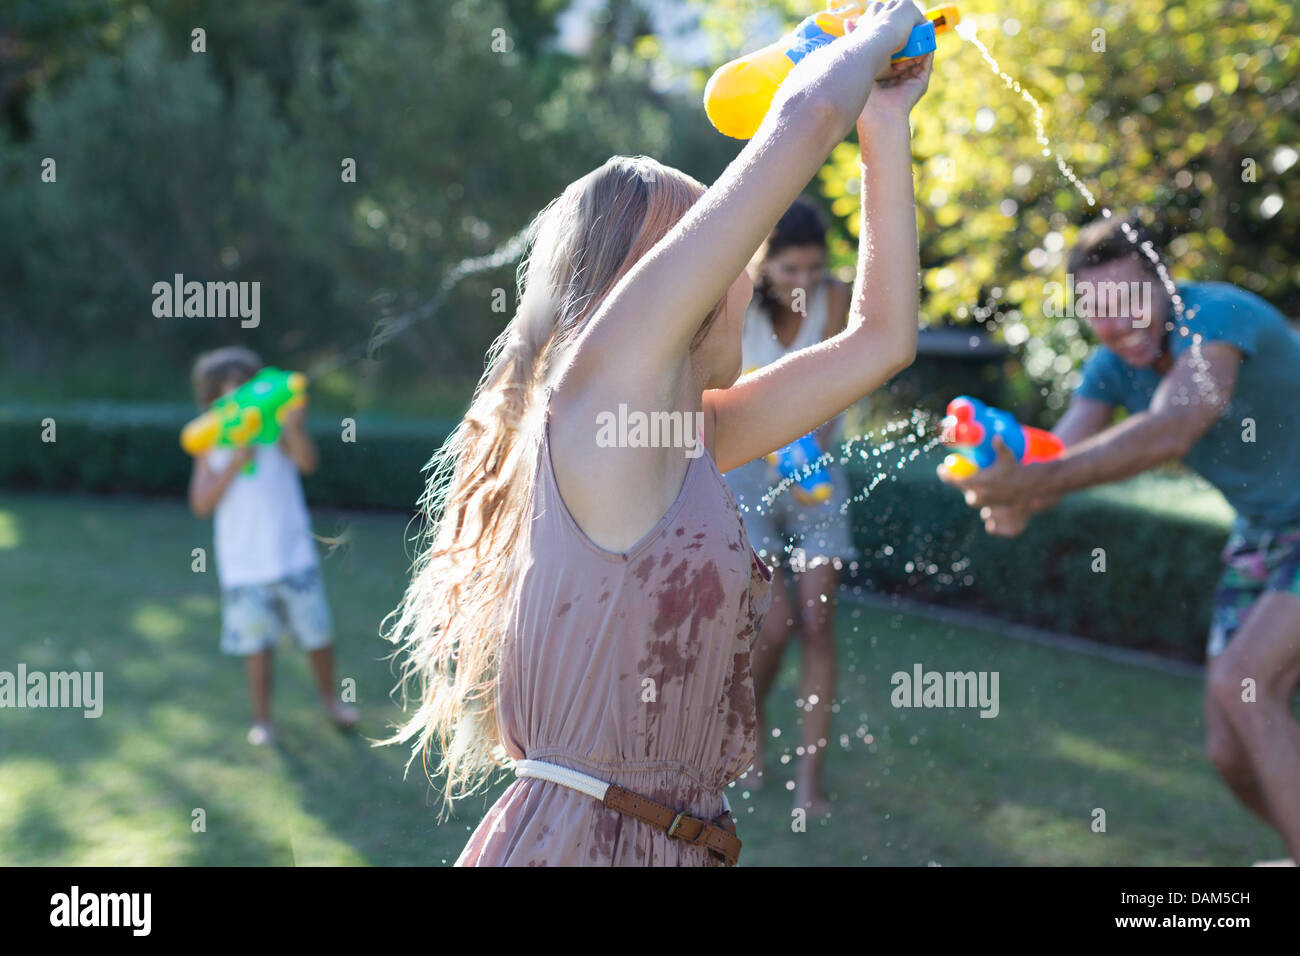 Family playing with water guns in backyard Stock Photo